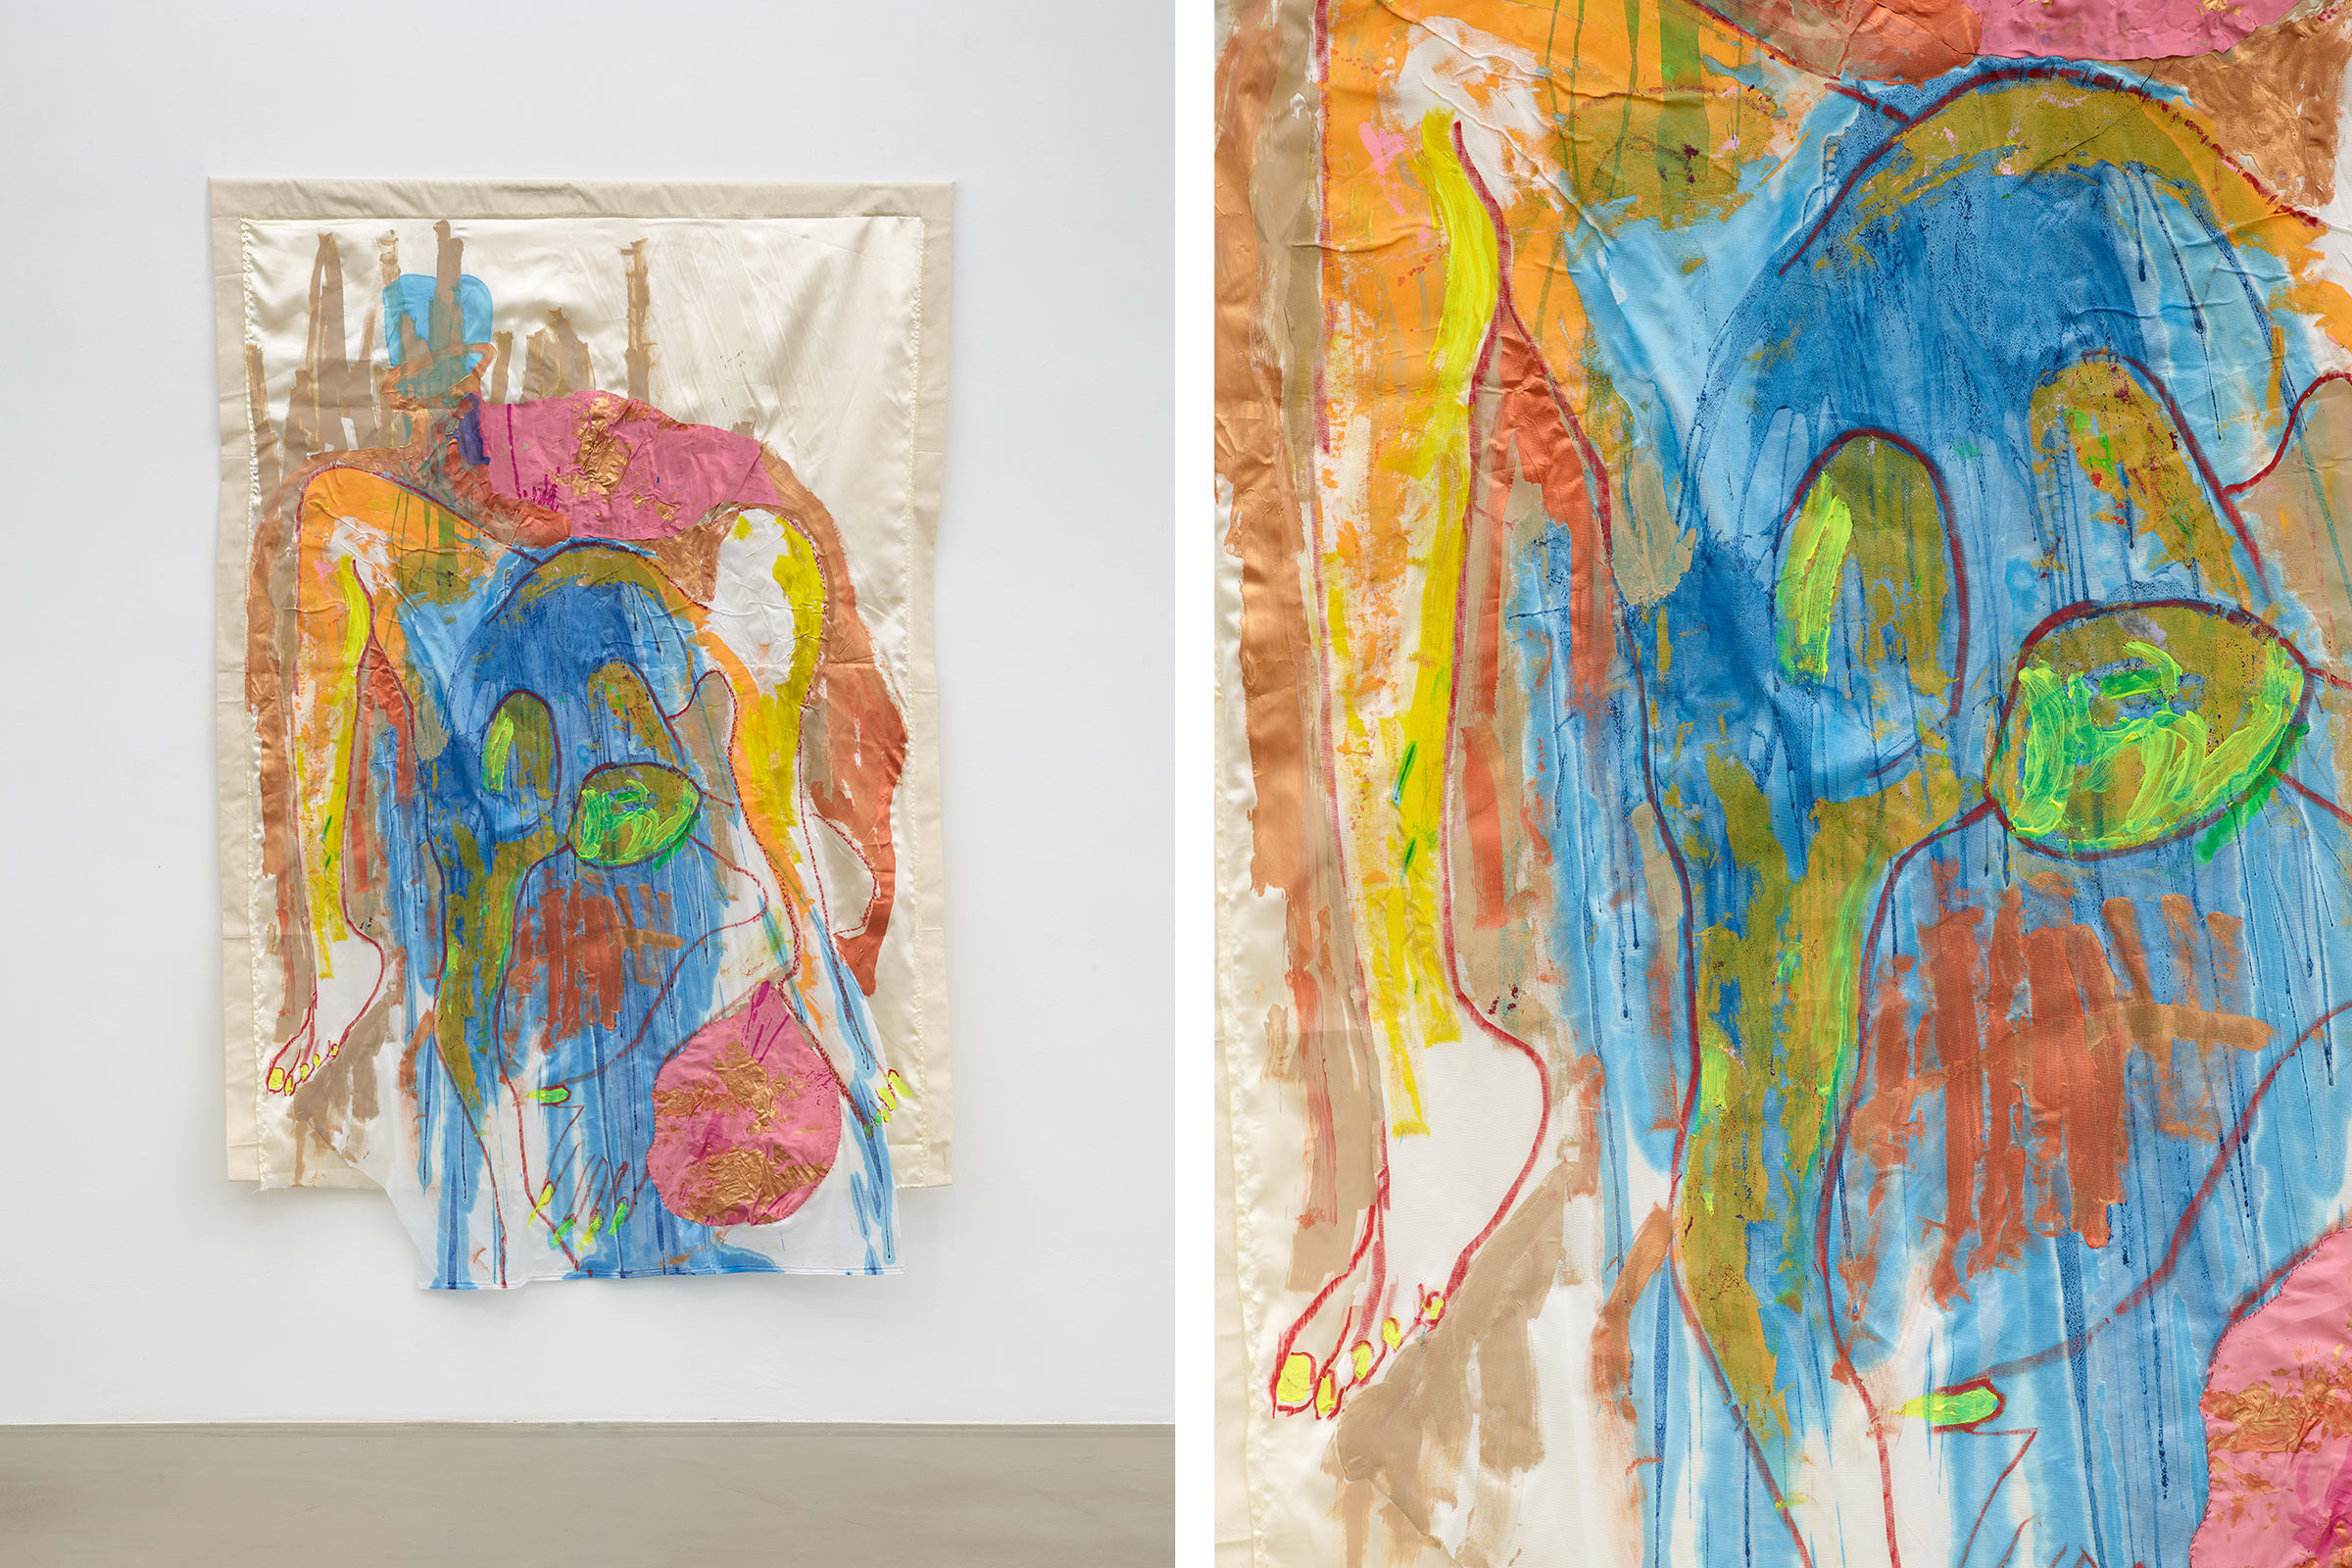 Installation view and detail of a work by Kresiah Mukwazhi that will be presented at Art Basel Hong Kong 2023. Photos by Simon Vogel. Courtesy of the artist and Jan Kaps, Cologne.